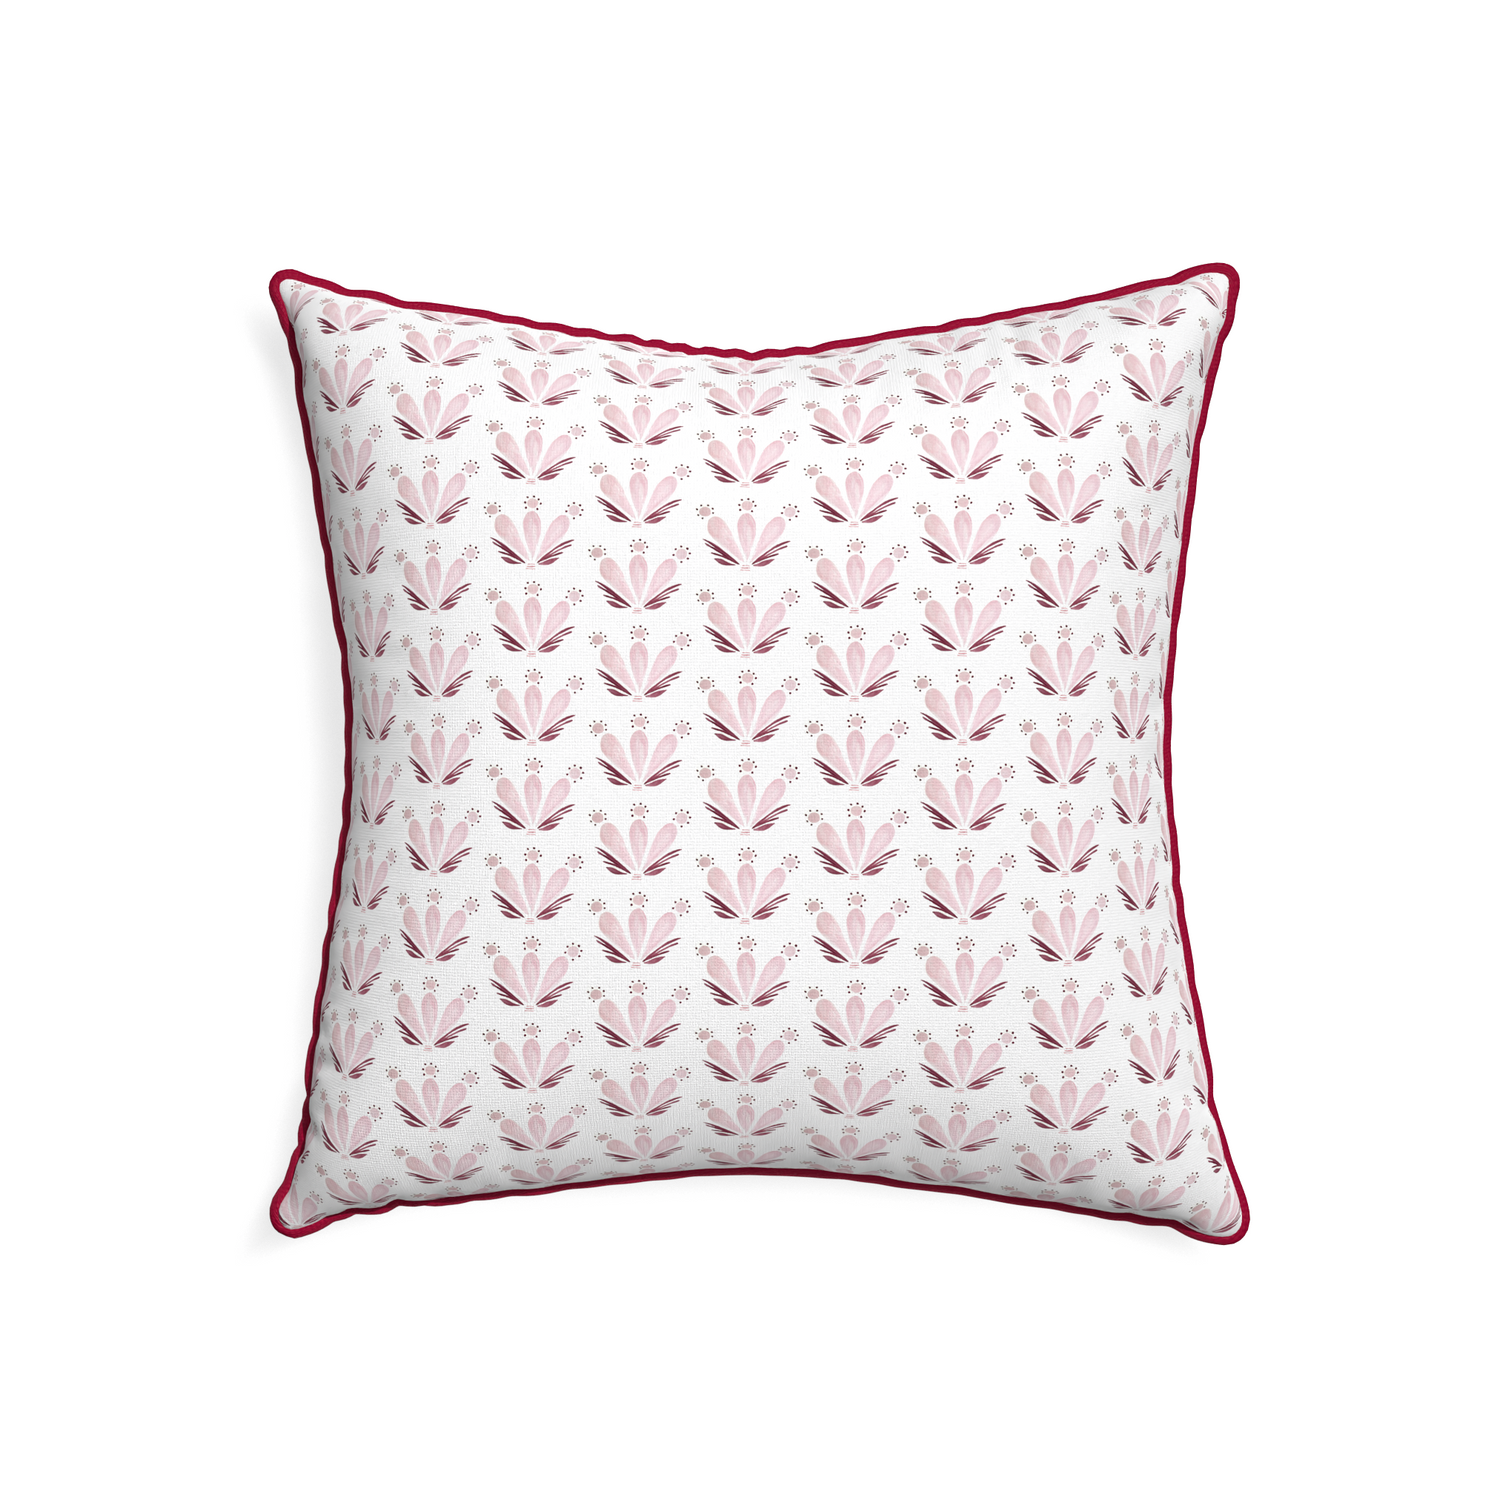 22-square serena pink custom pillow with raspberry piping on white background